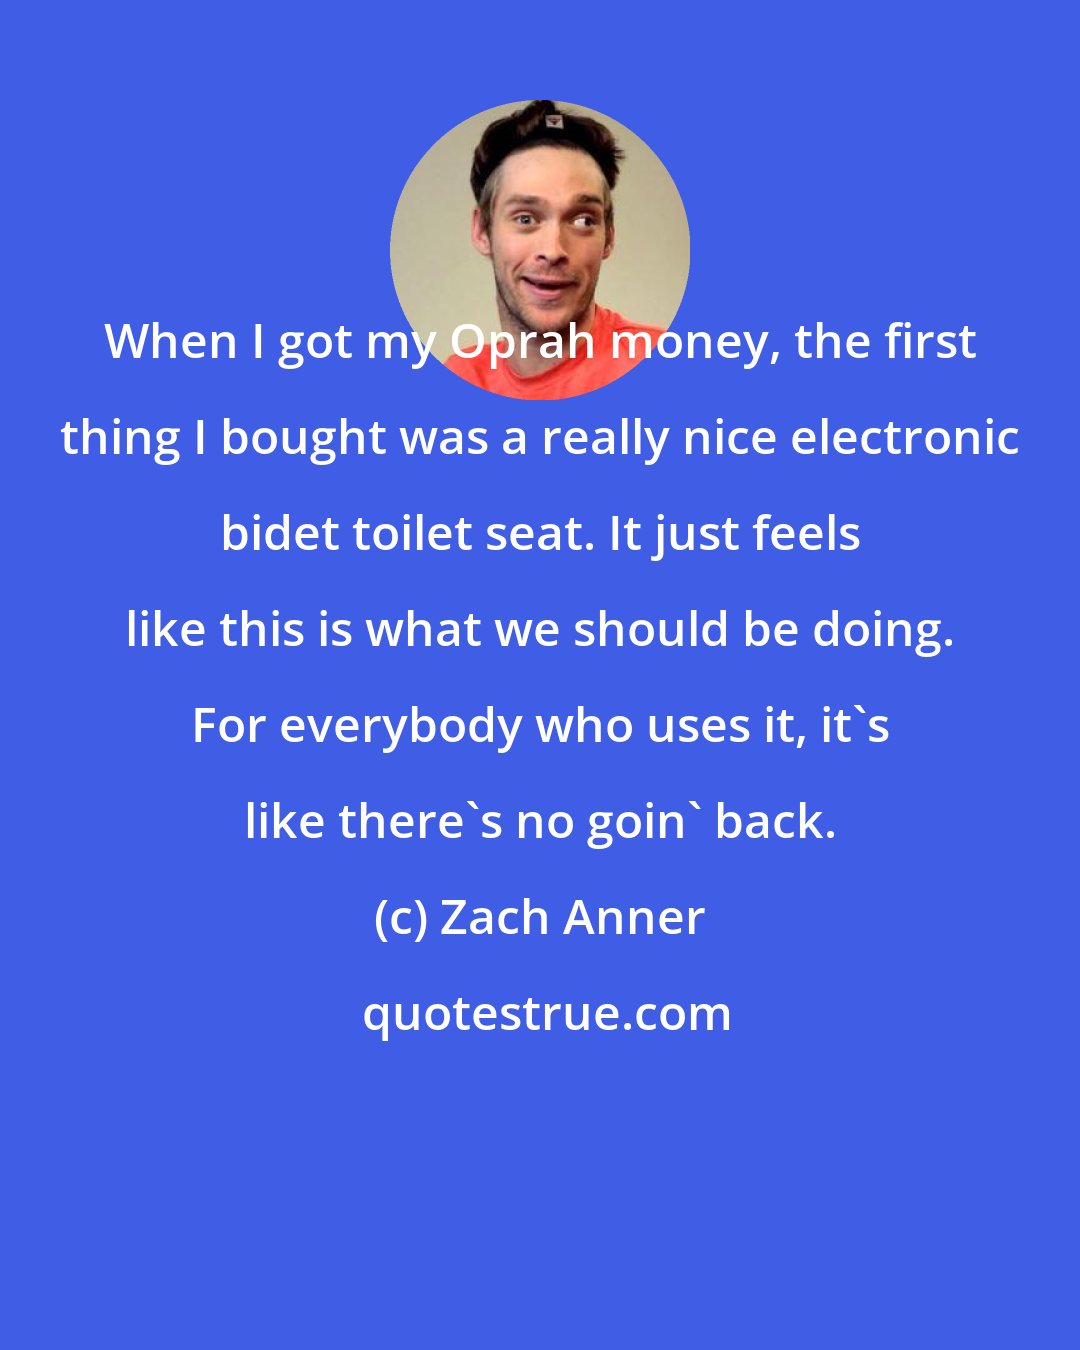 Zach Anner: When I got my Oprah money, the first thing I bought was a really nice electronic bidet toilet seat. It just feels like this is what we should be doing. For everybody who uses it, it's like there's no goin' back.